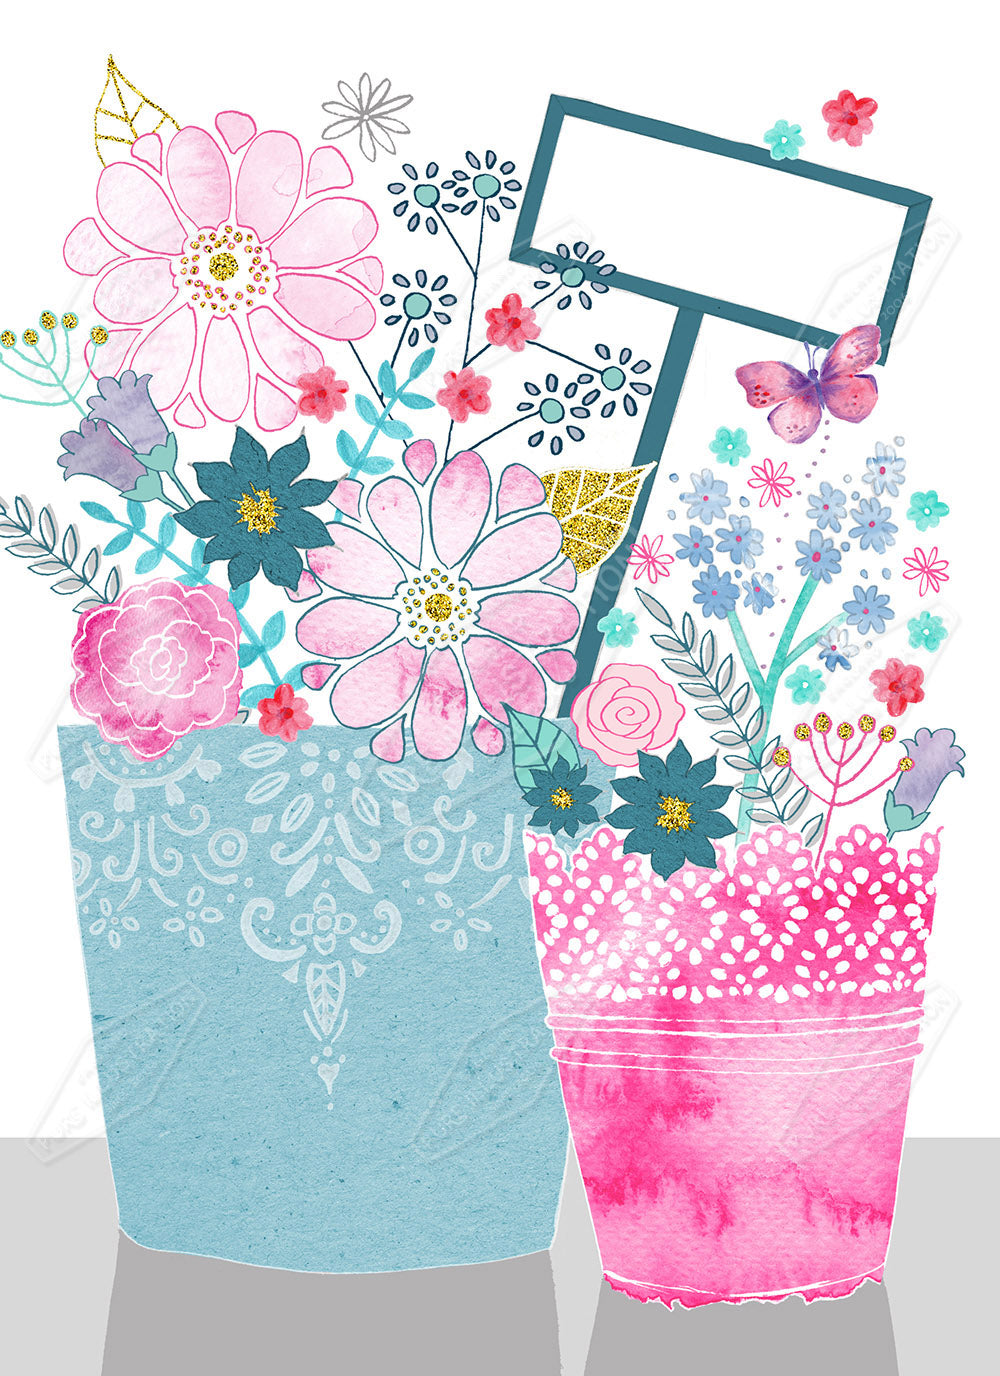 Birthday Gardening Pots Design by Victoria Marks for Pure Art Licensing Agency & Surface Design Studio